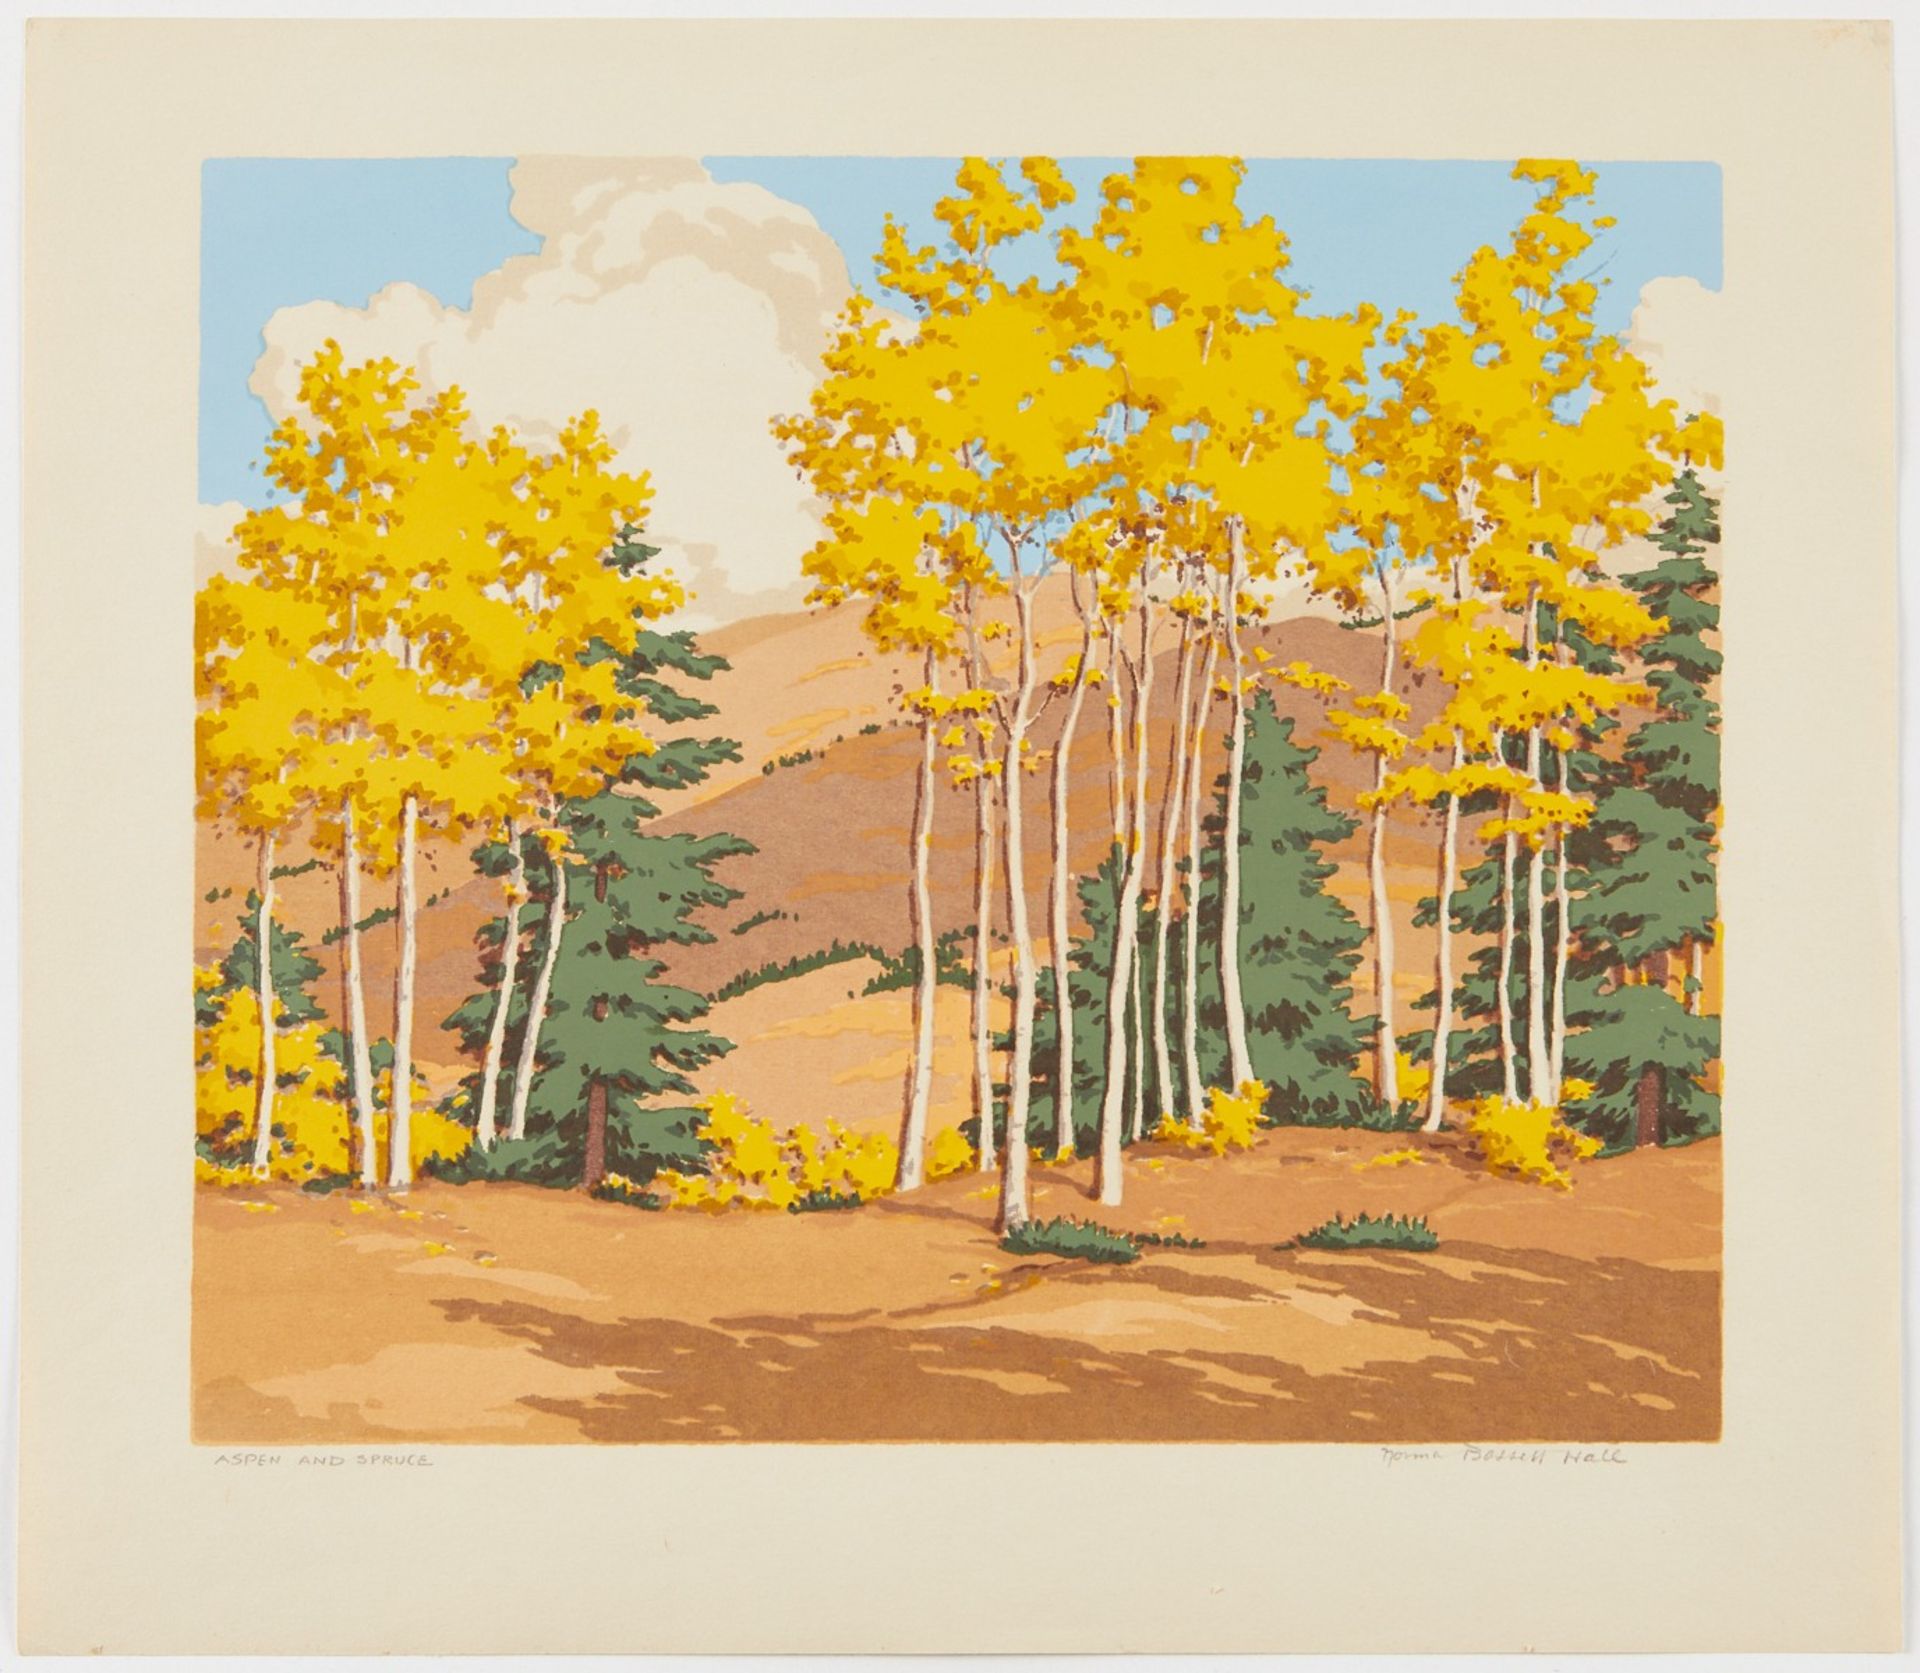 Norma Bassett Hall "Aspen and Spruce" Serigraph - Image 2 of 5